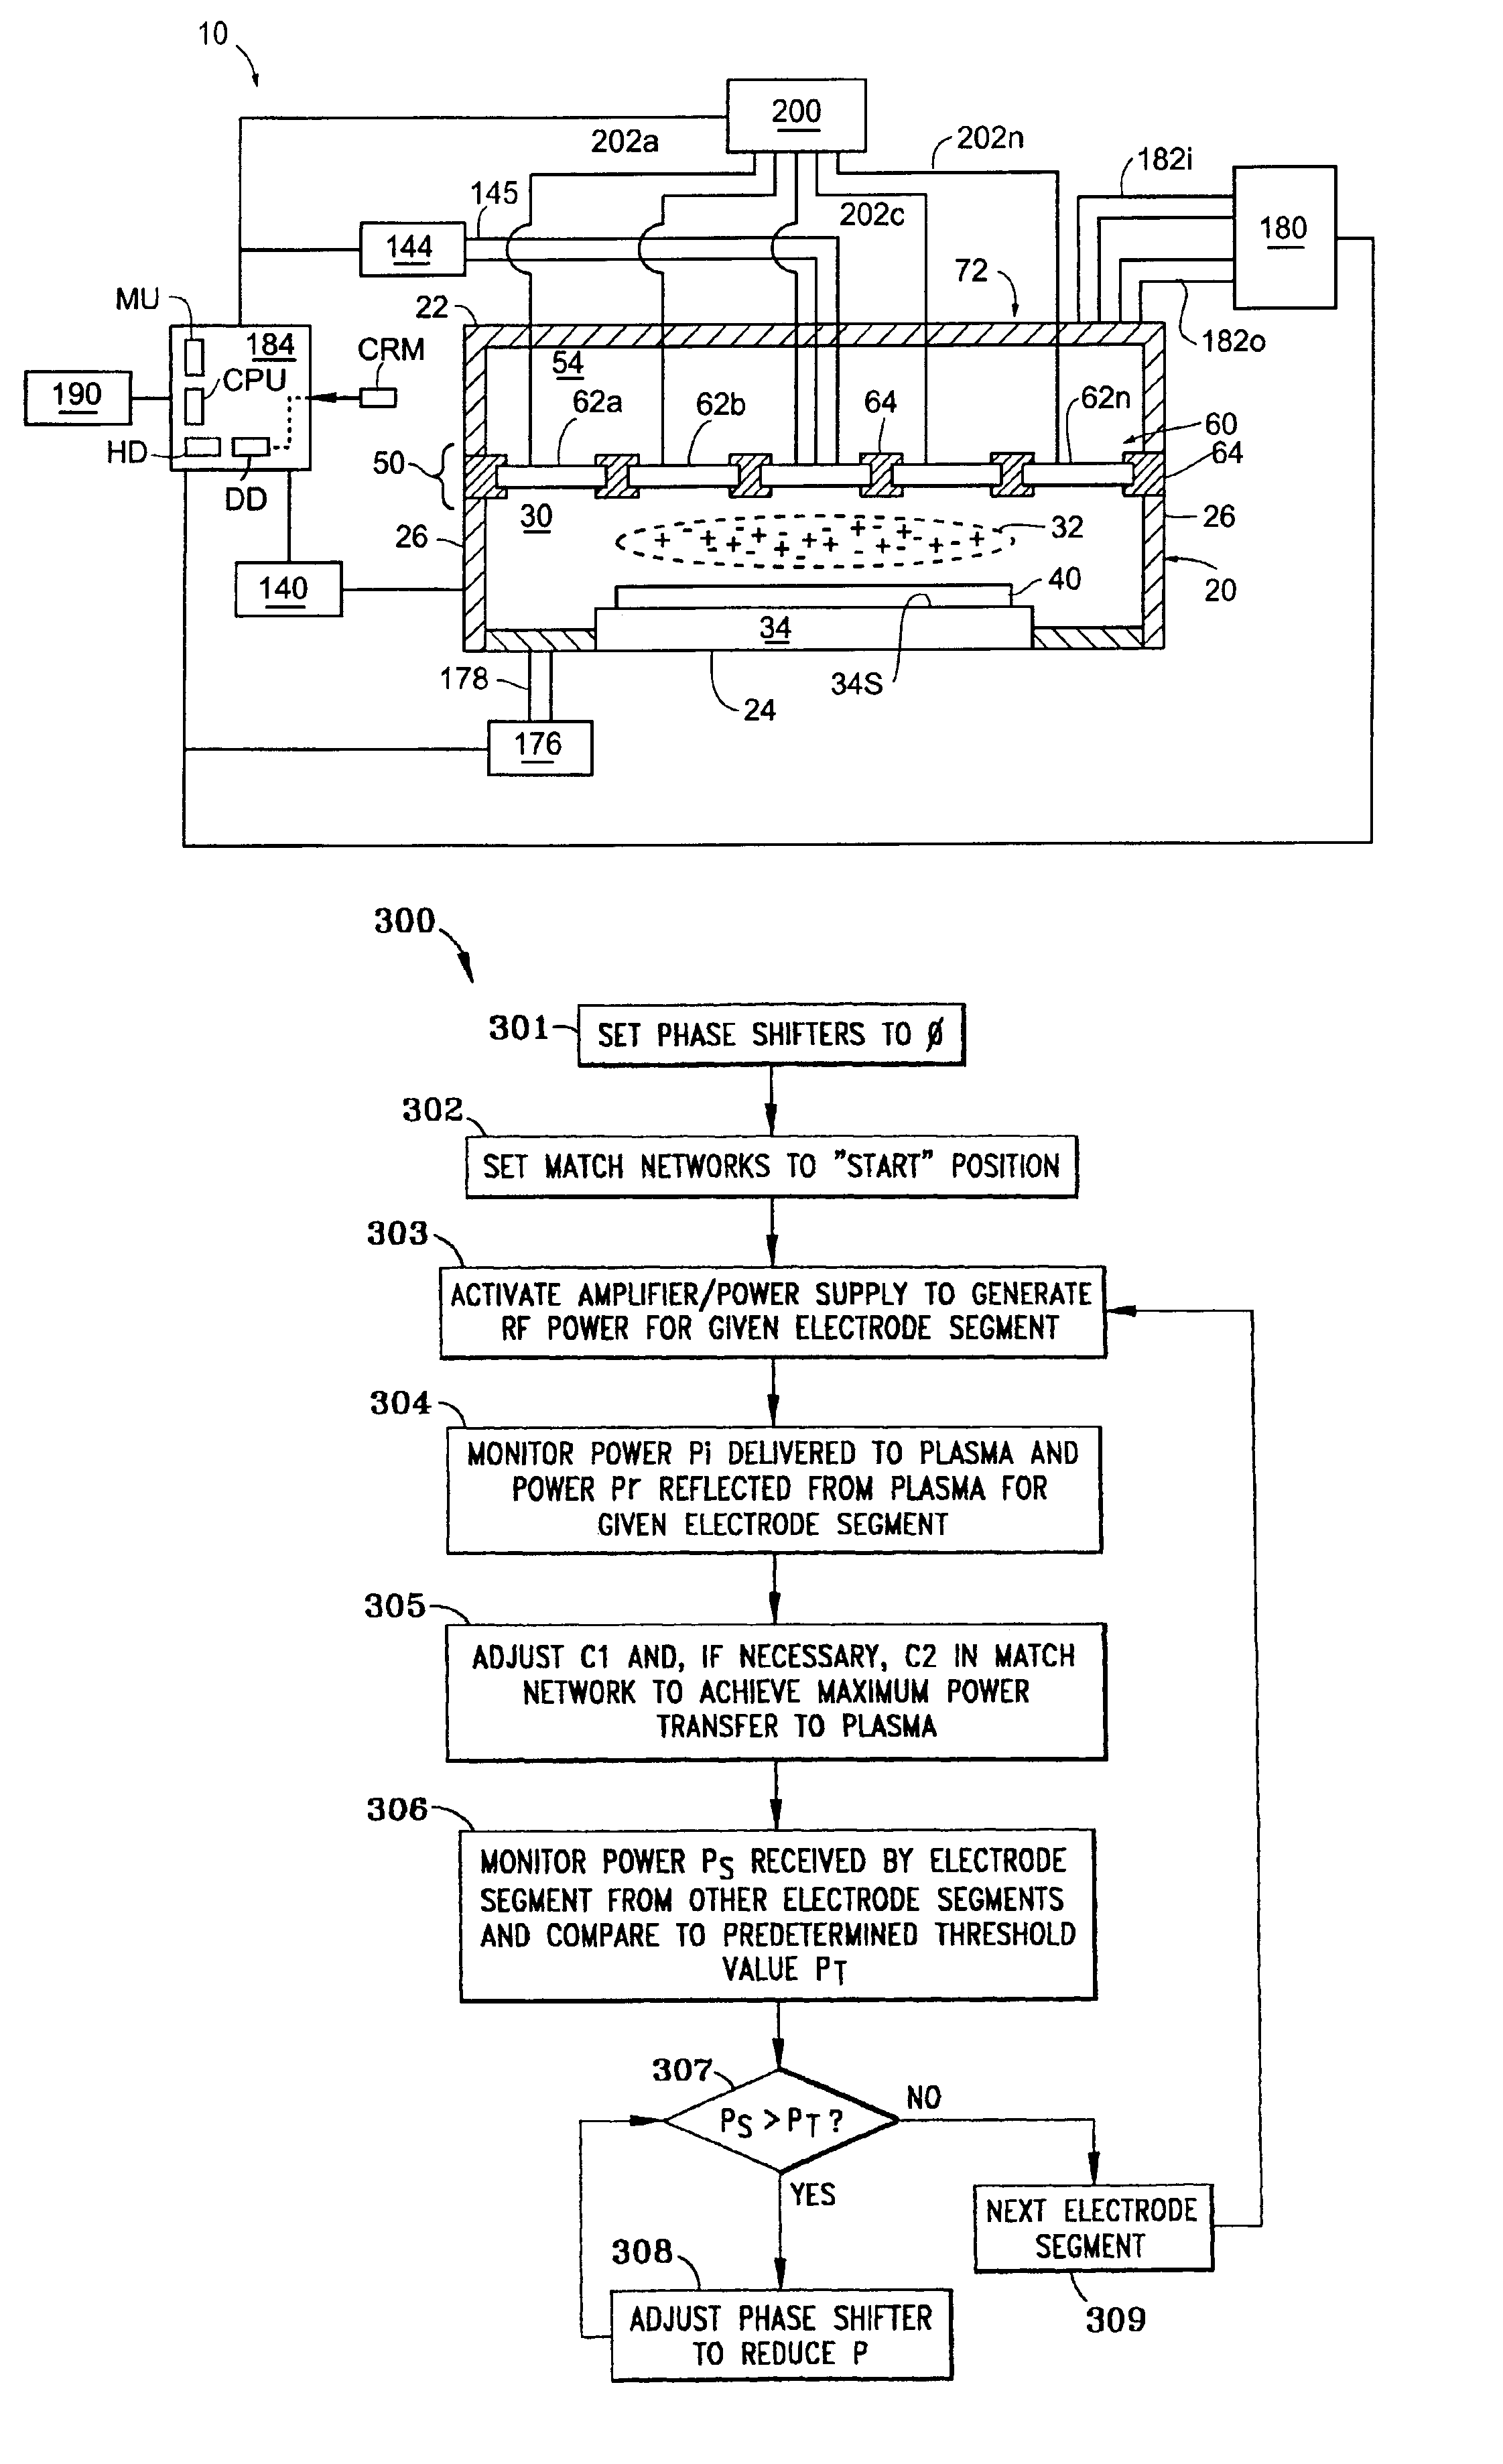 Control of power delivered to a multiple segment inject electrode